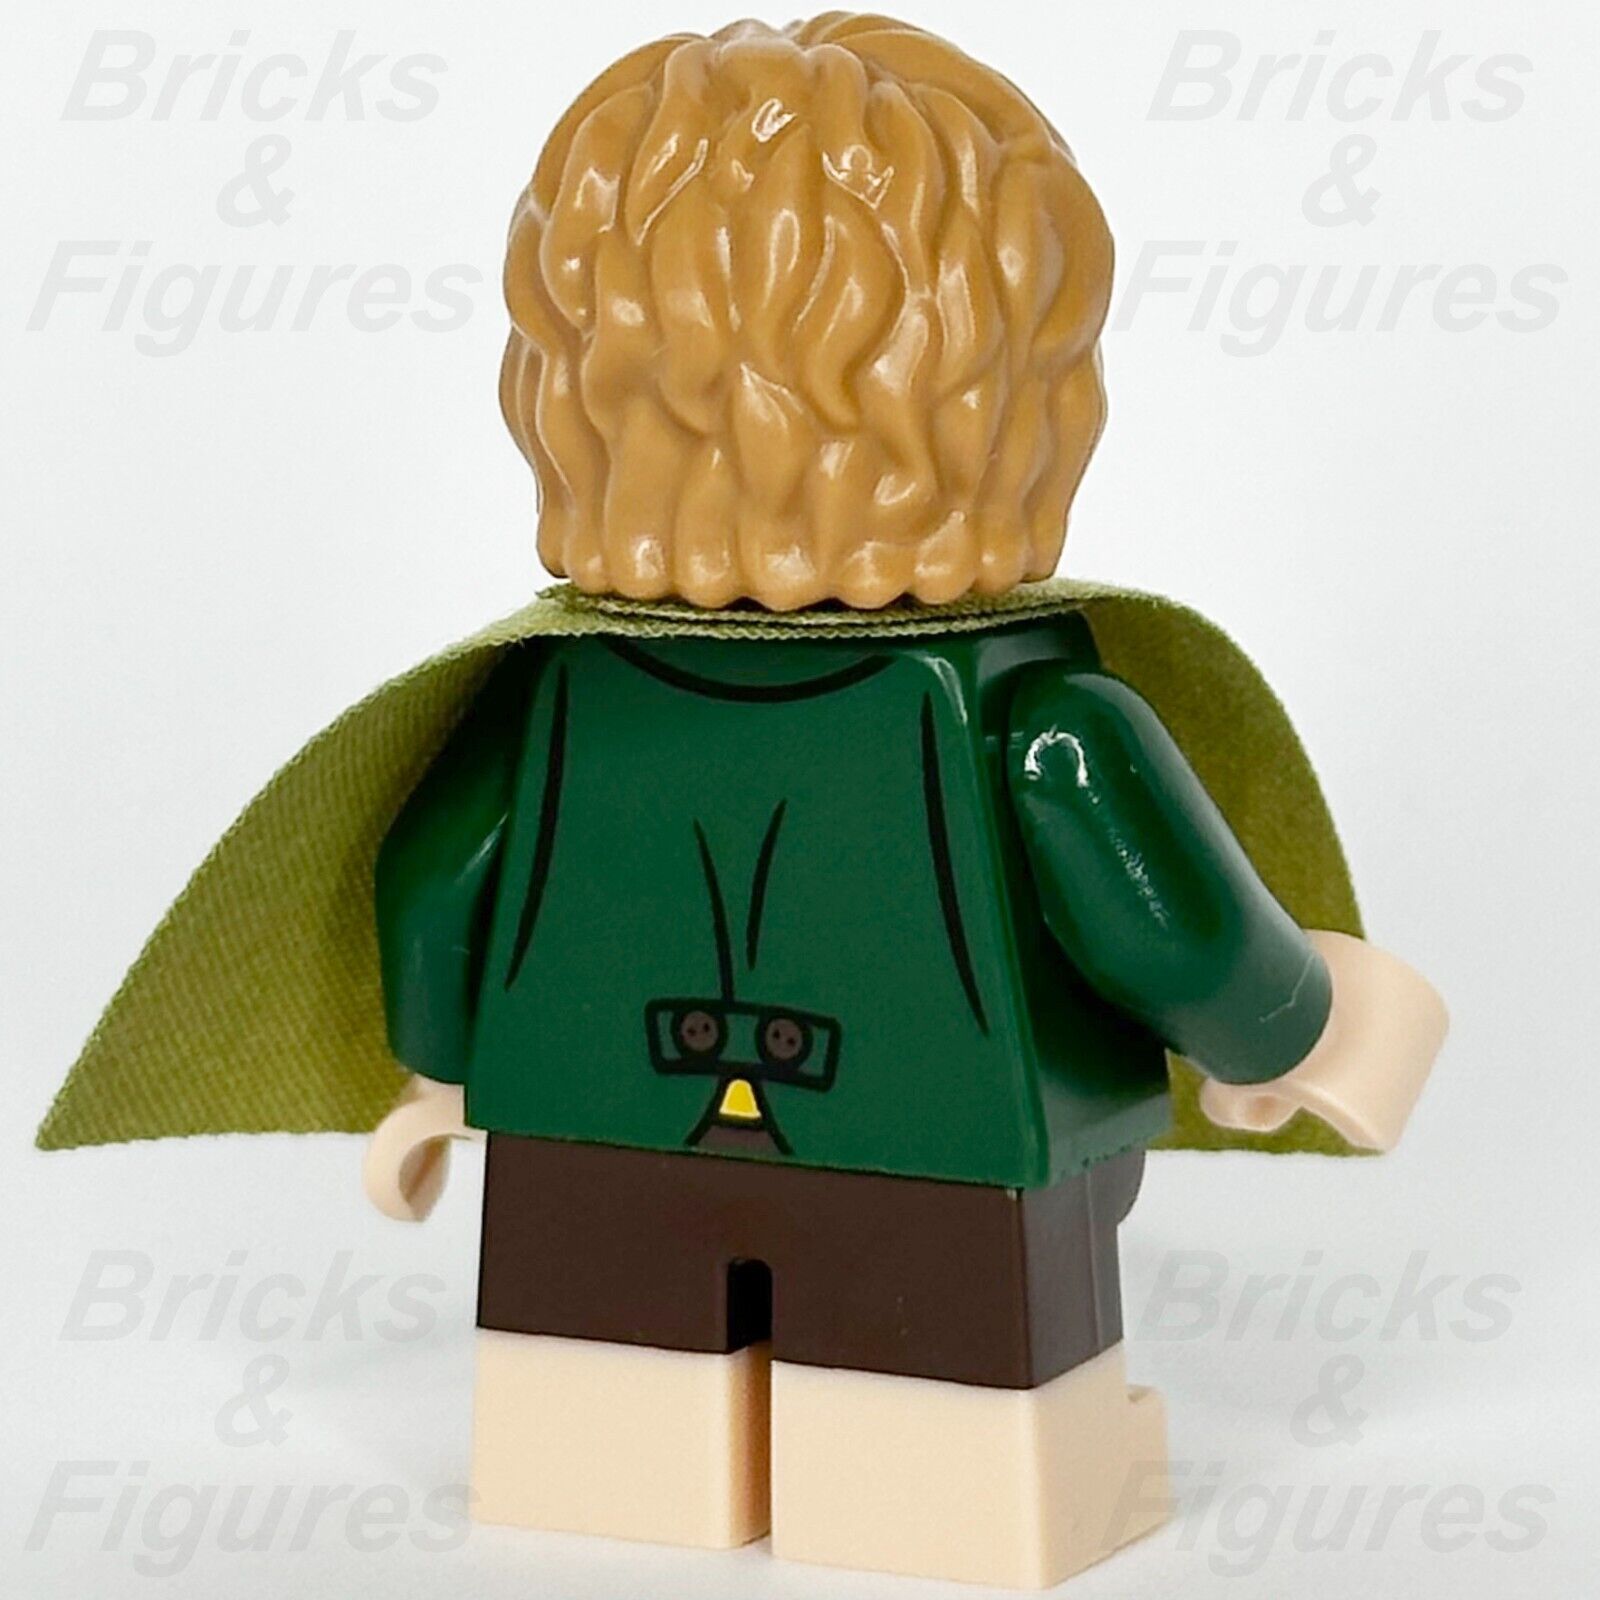 LEGO Merry Minifigure Hobbit The Lord of the Rings Meriadoc Brandybuck 10316